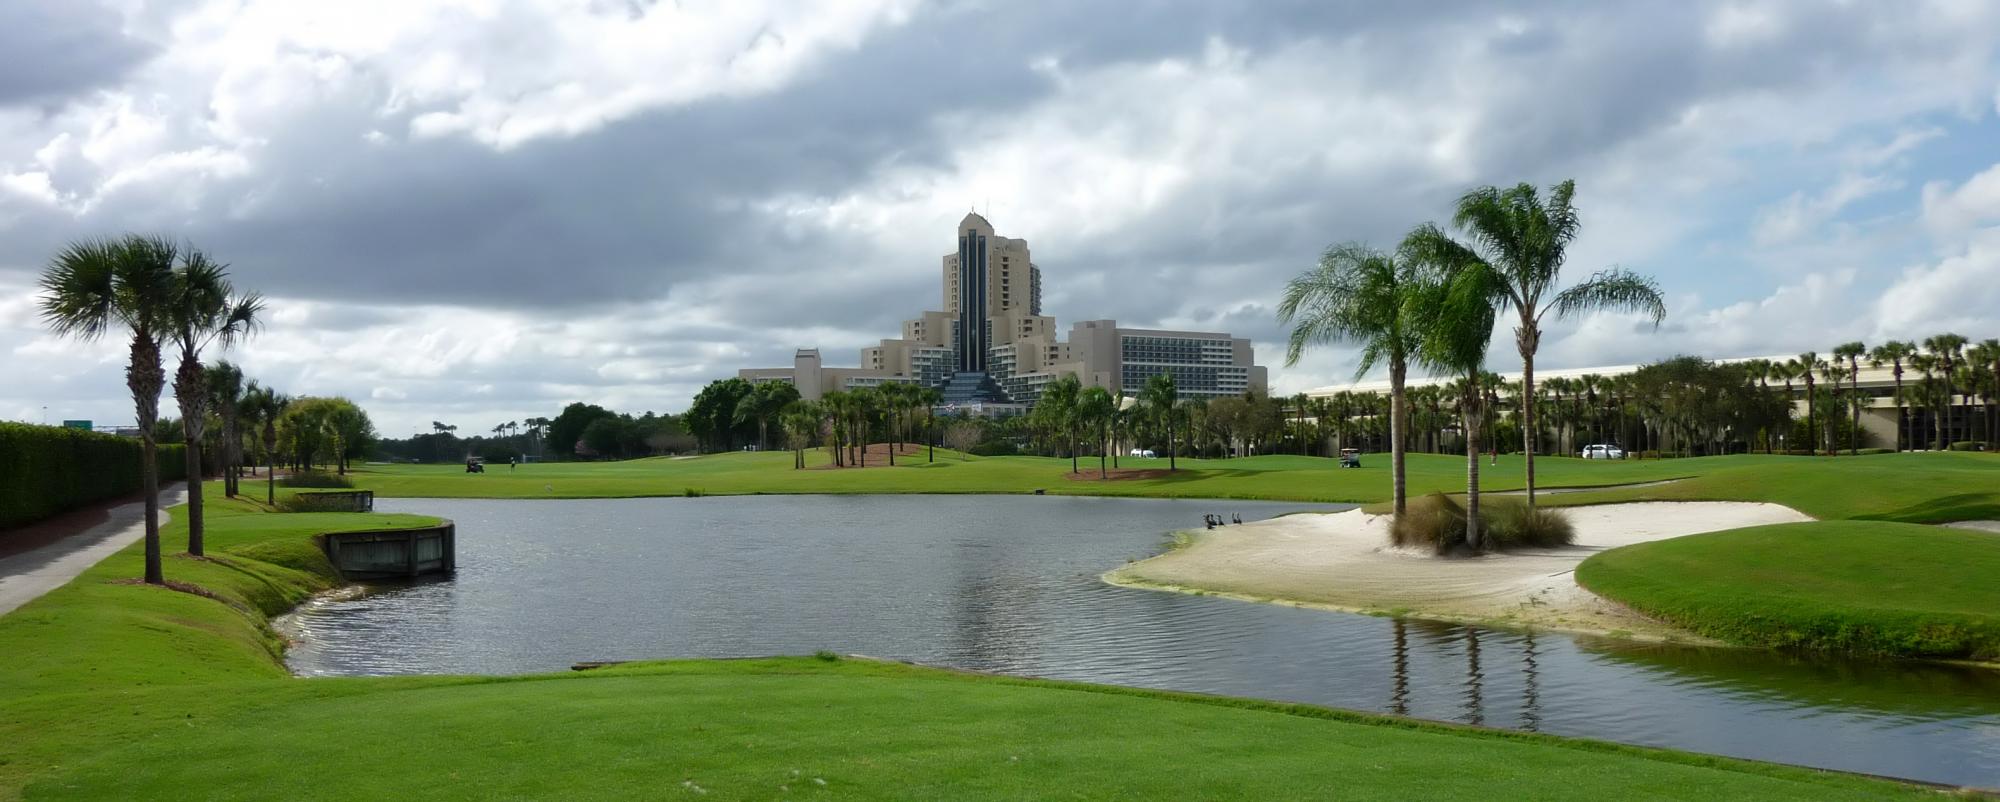 Hawk's Landing Golf Course carries among the most desirable golf course near Florida